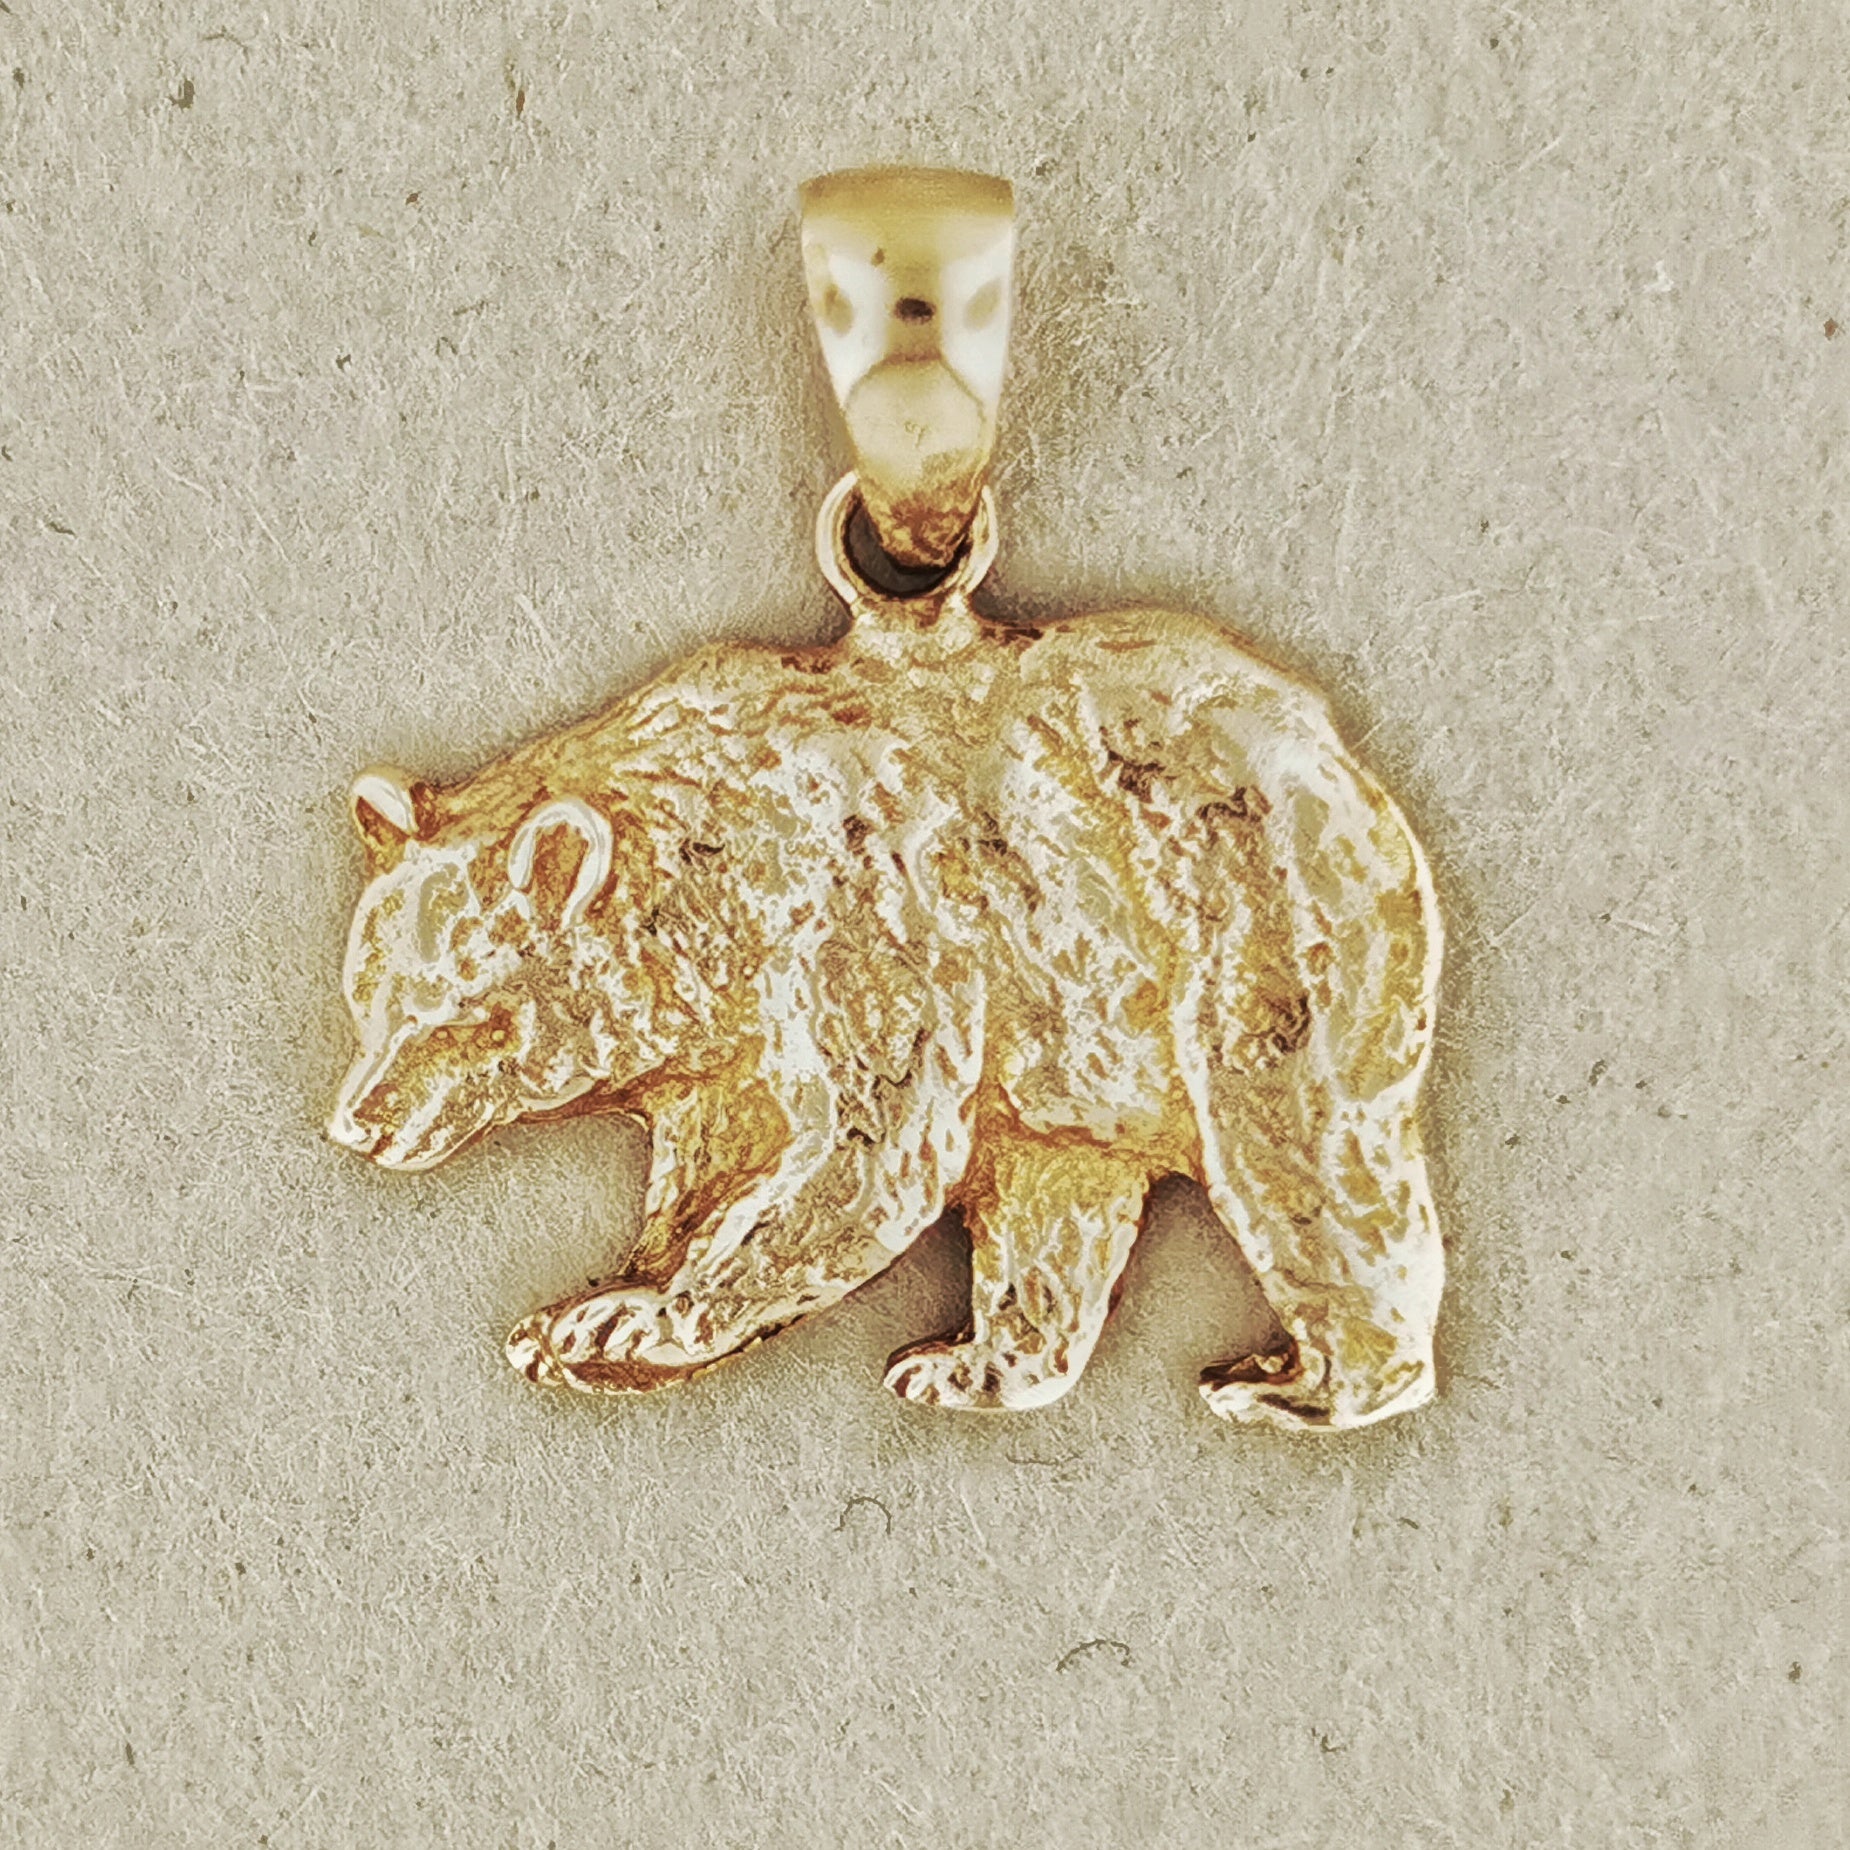 Bear Charm Pendant in 925 Silver or Bronze, Grizzley Bear Pendant Charm Necklace, Bear Totem Pendant, Bronze Bear Pendant, Bear Jewelry In Antique Bronze, Bear Totem Pendant, Bronze Animal Pendants, Bronze Bear Charm Pendant, Bronze Bear Necklace